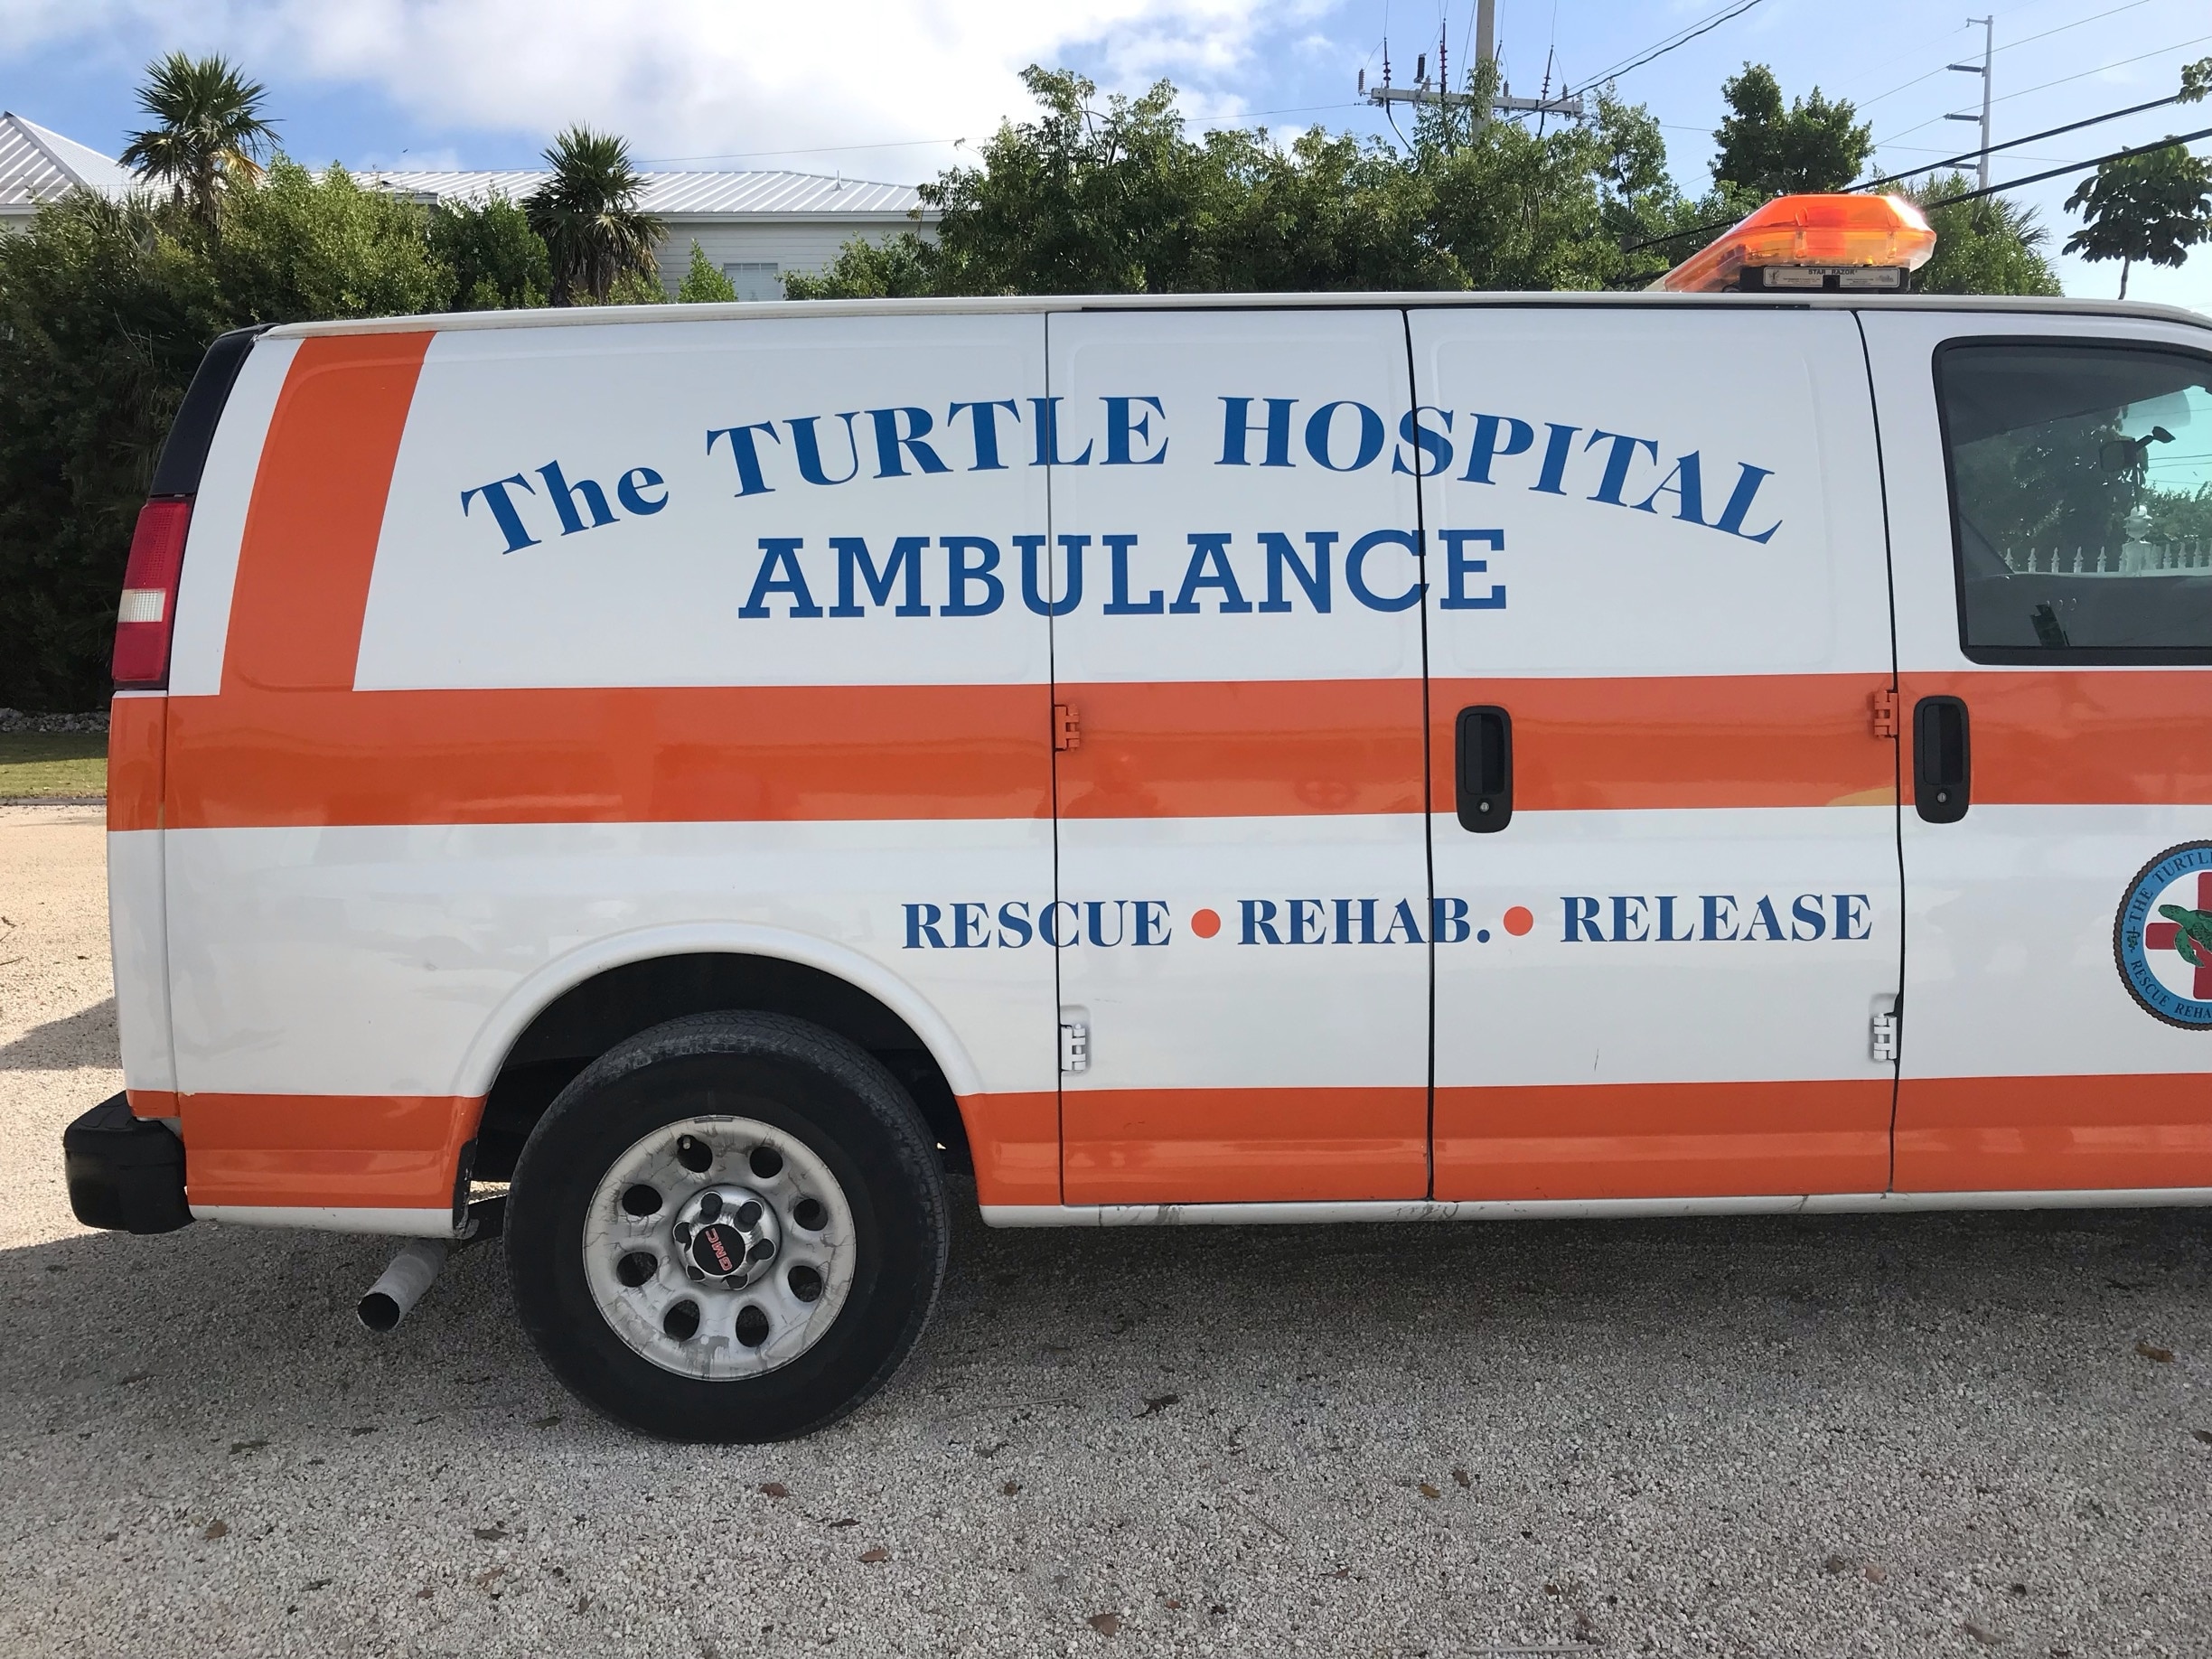 A must visit in my opinion. Go to the turtle hospital and learn about our endangered friends. See the great work the hospital is doing to look after the turtles. Takes about 90 mins to go round,meet all the turtles and even feed them.